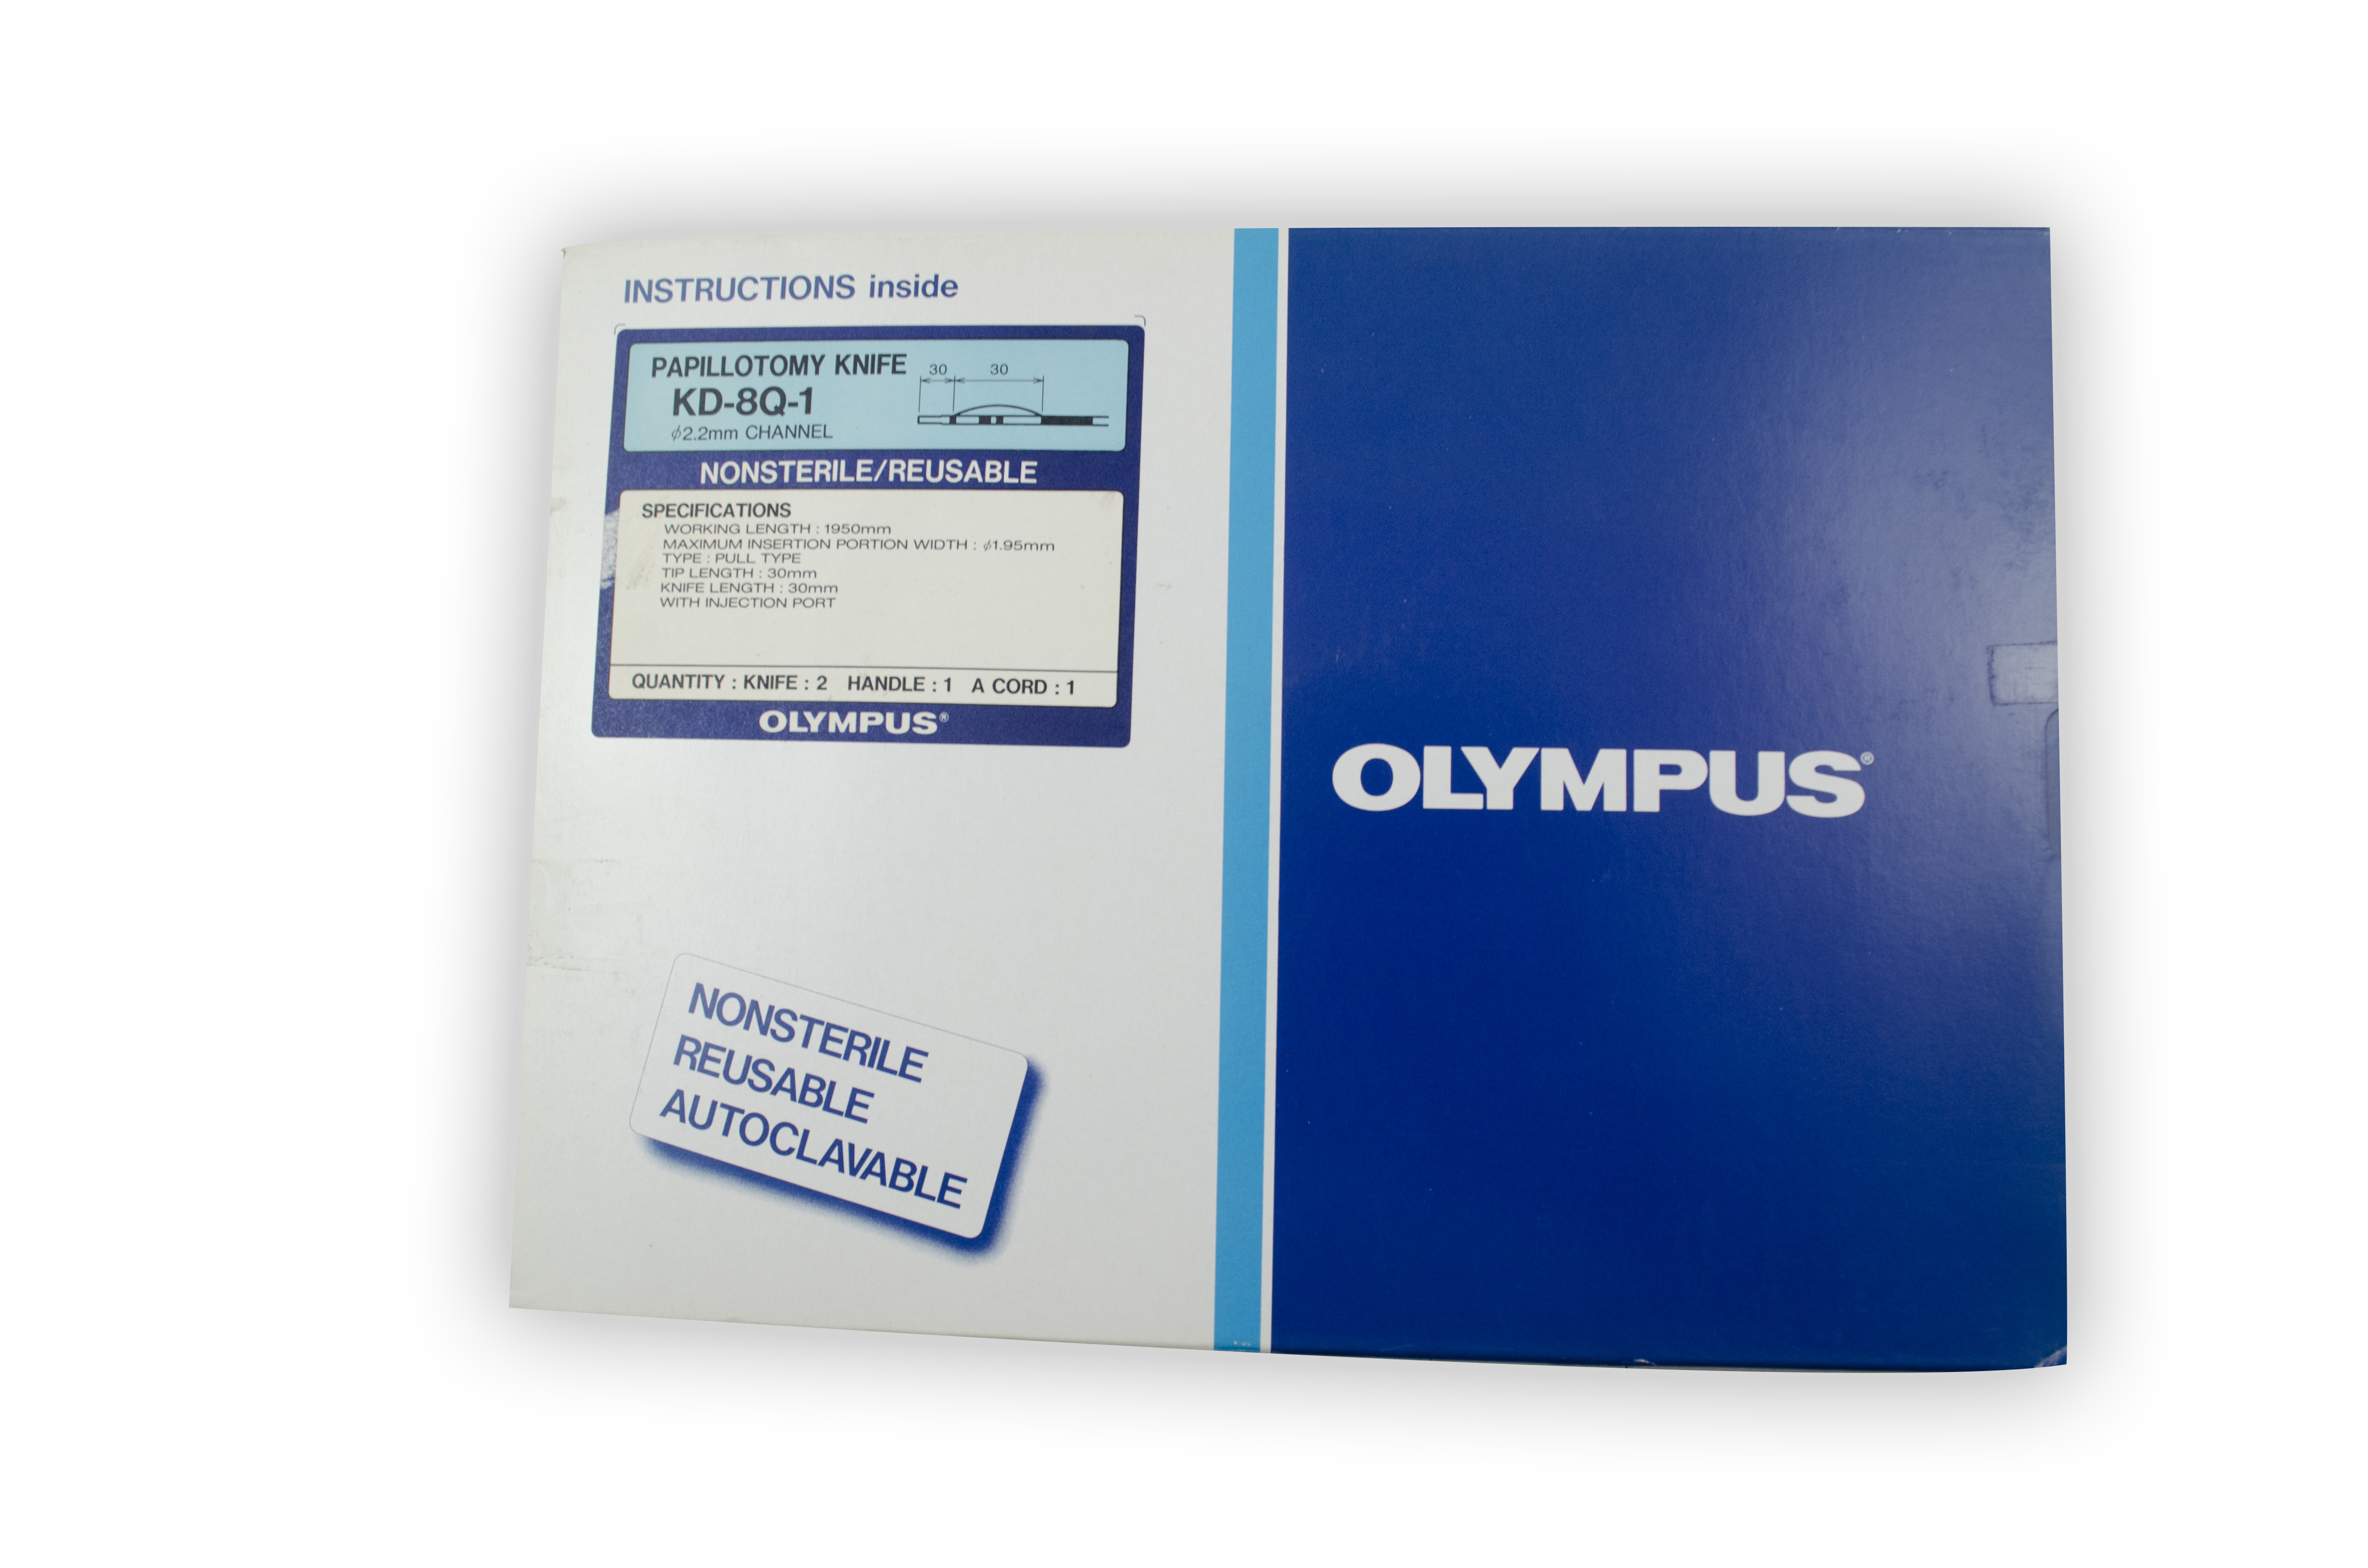 Olympus Reusable Sphincterotome - KD-8Q-1 (Set of 2 Knives, 1 Handle, 1 A Cord)